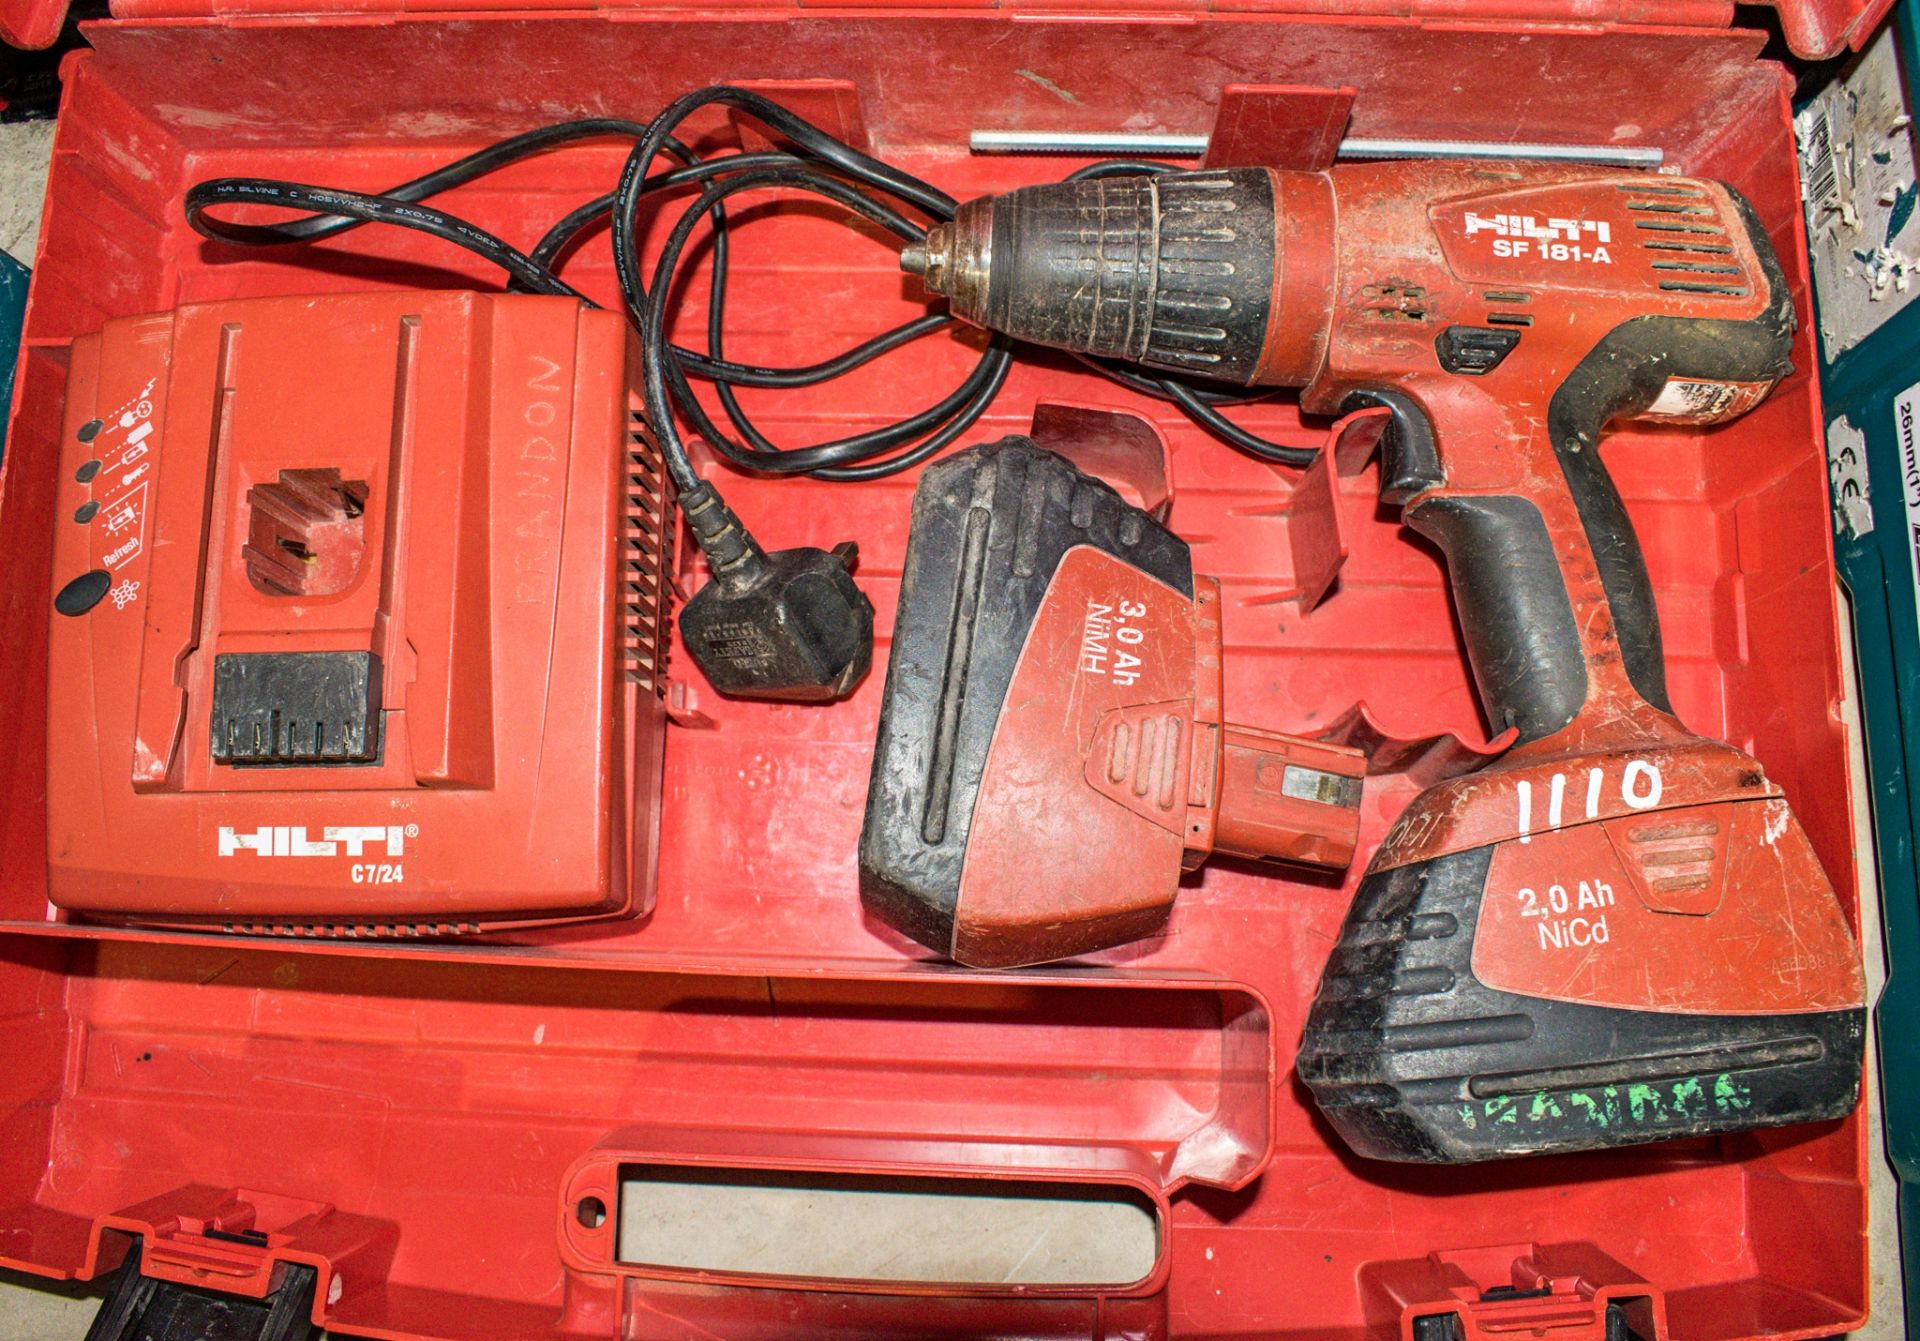 Hilti SF181A 18v cordless power drill c/w 2 batteries, charger & carry case